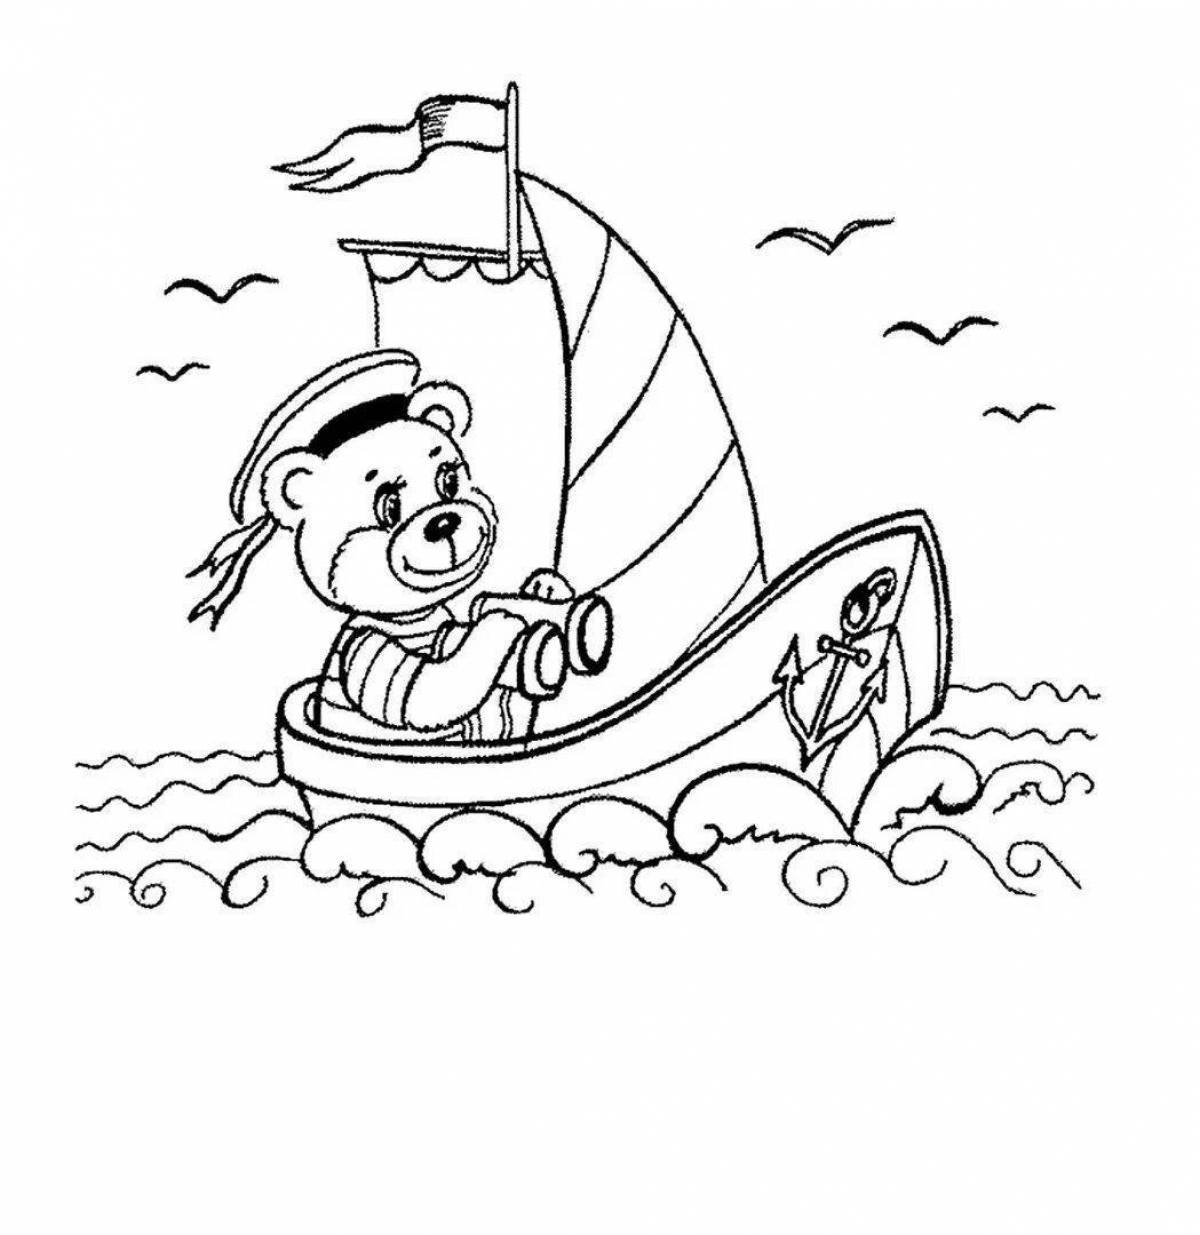 Coloring page happy hut for kids